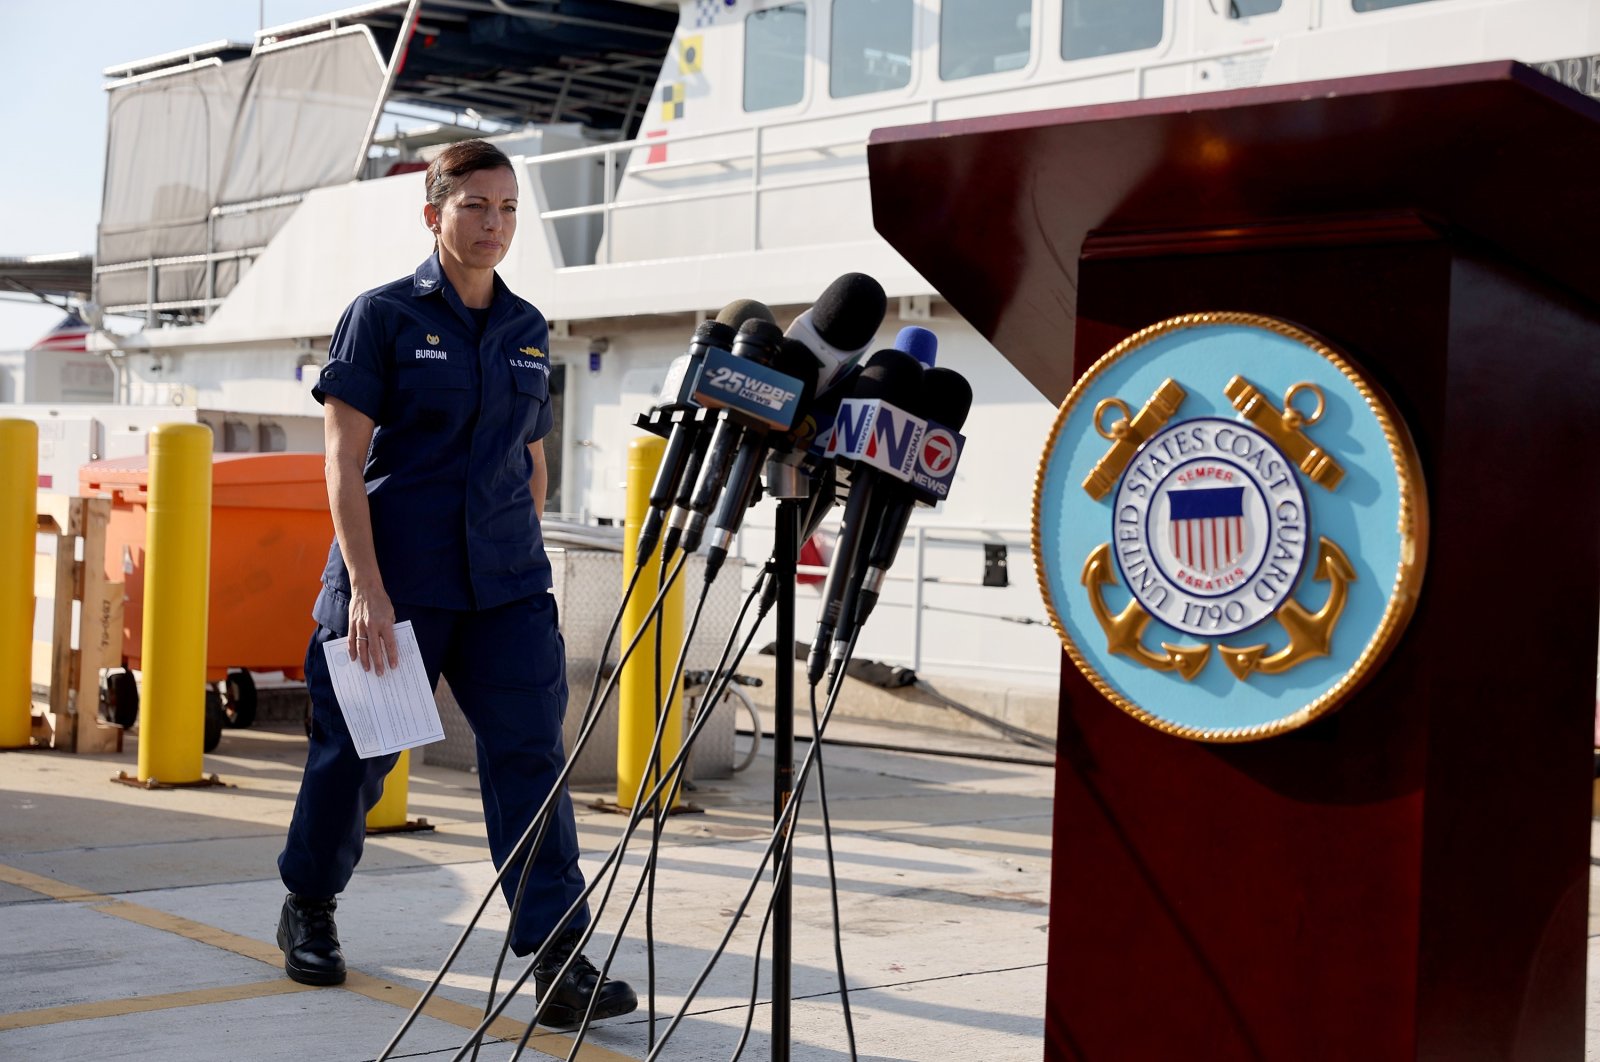 U.S. Coast Guard Miami Commander Capt. Jo-Ann F. Burdian arrives to speak during a press conference about the ongoing search for survivors of a capsized vessel in Miami, Florida, U.S., Jan. 26, 2022. (AFP Photo)